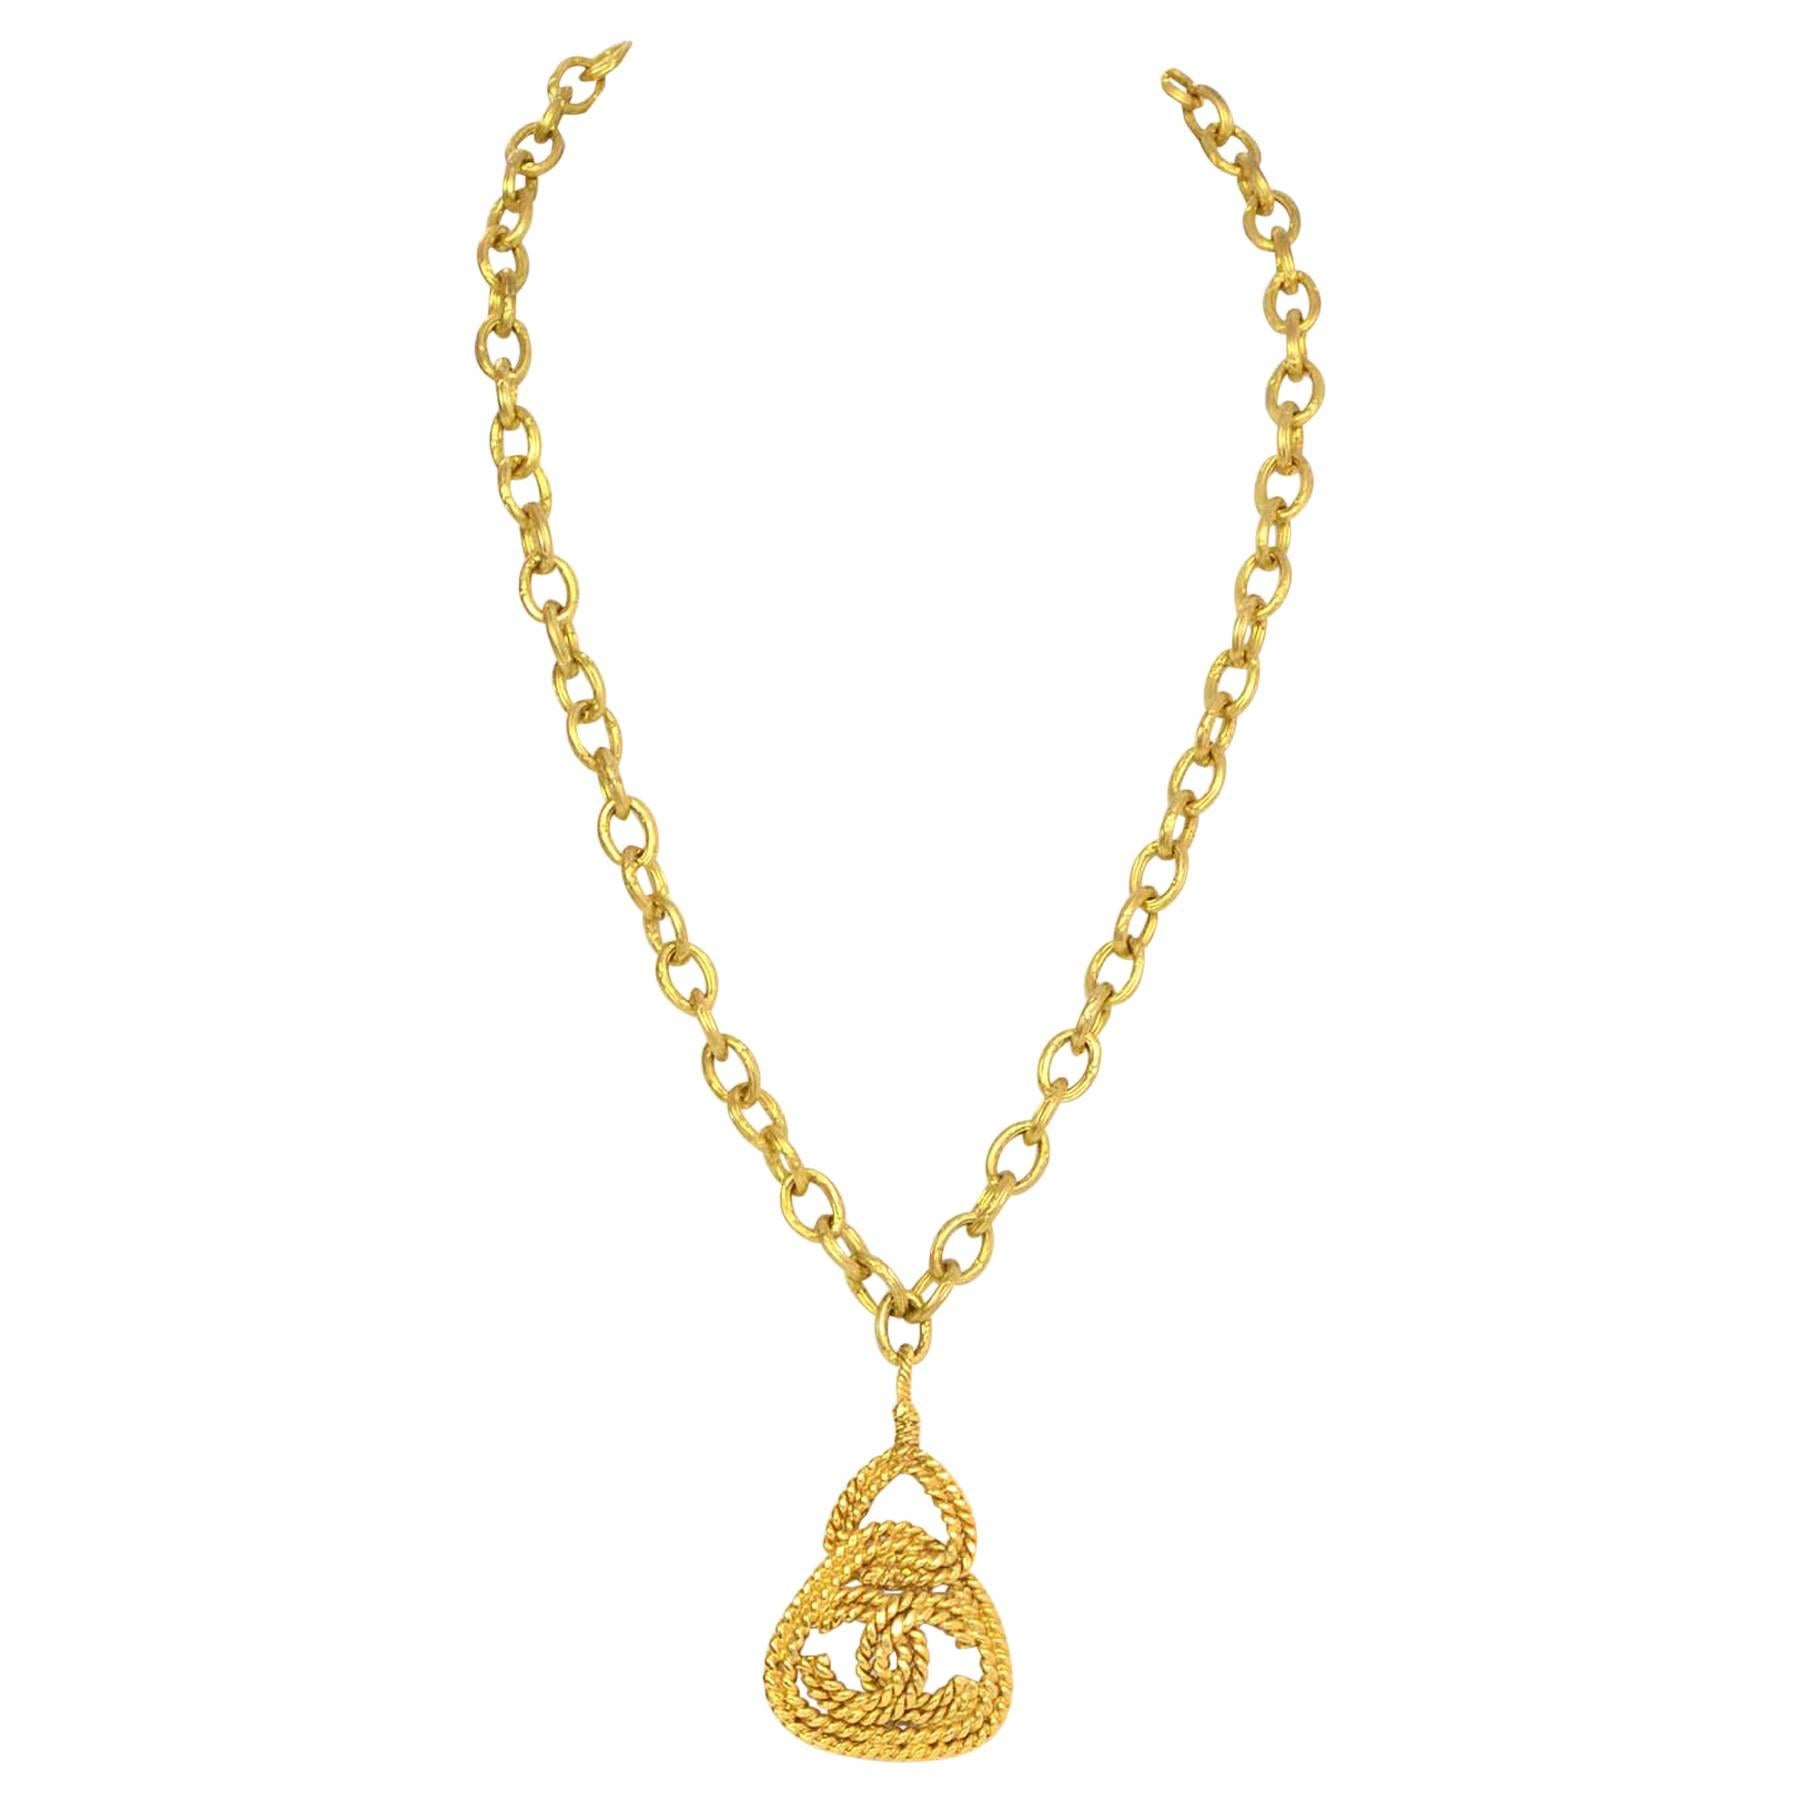 Chanel 1991 Vintage Gold-tone Necklace with Braided CC Charm